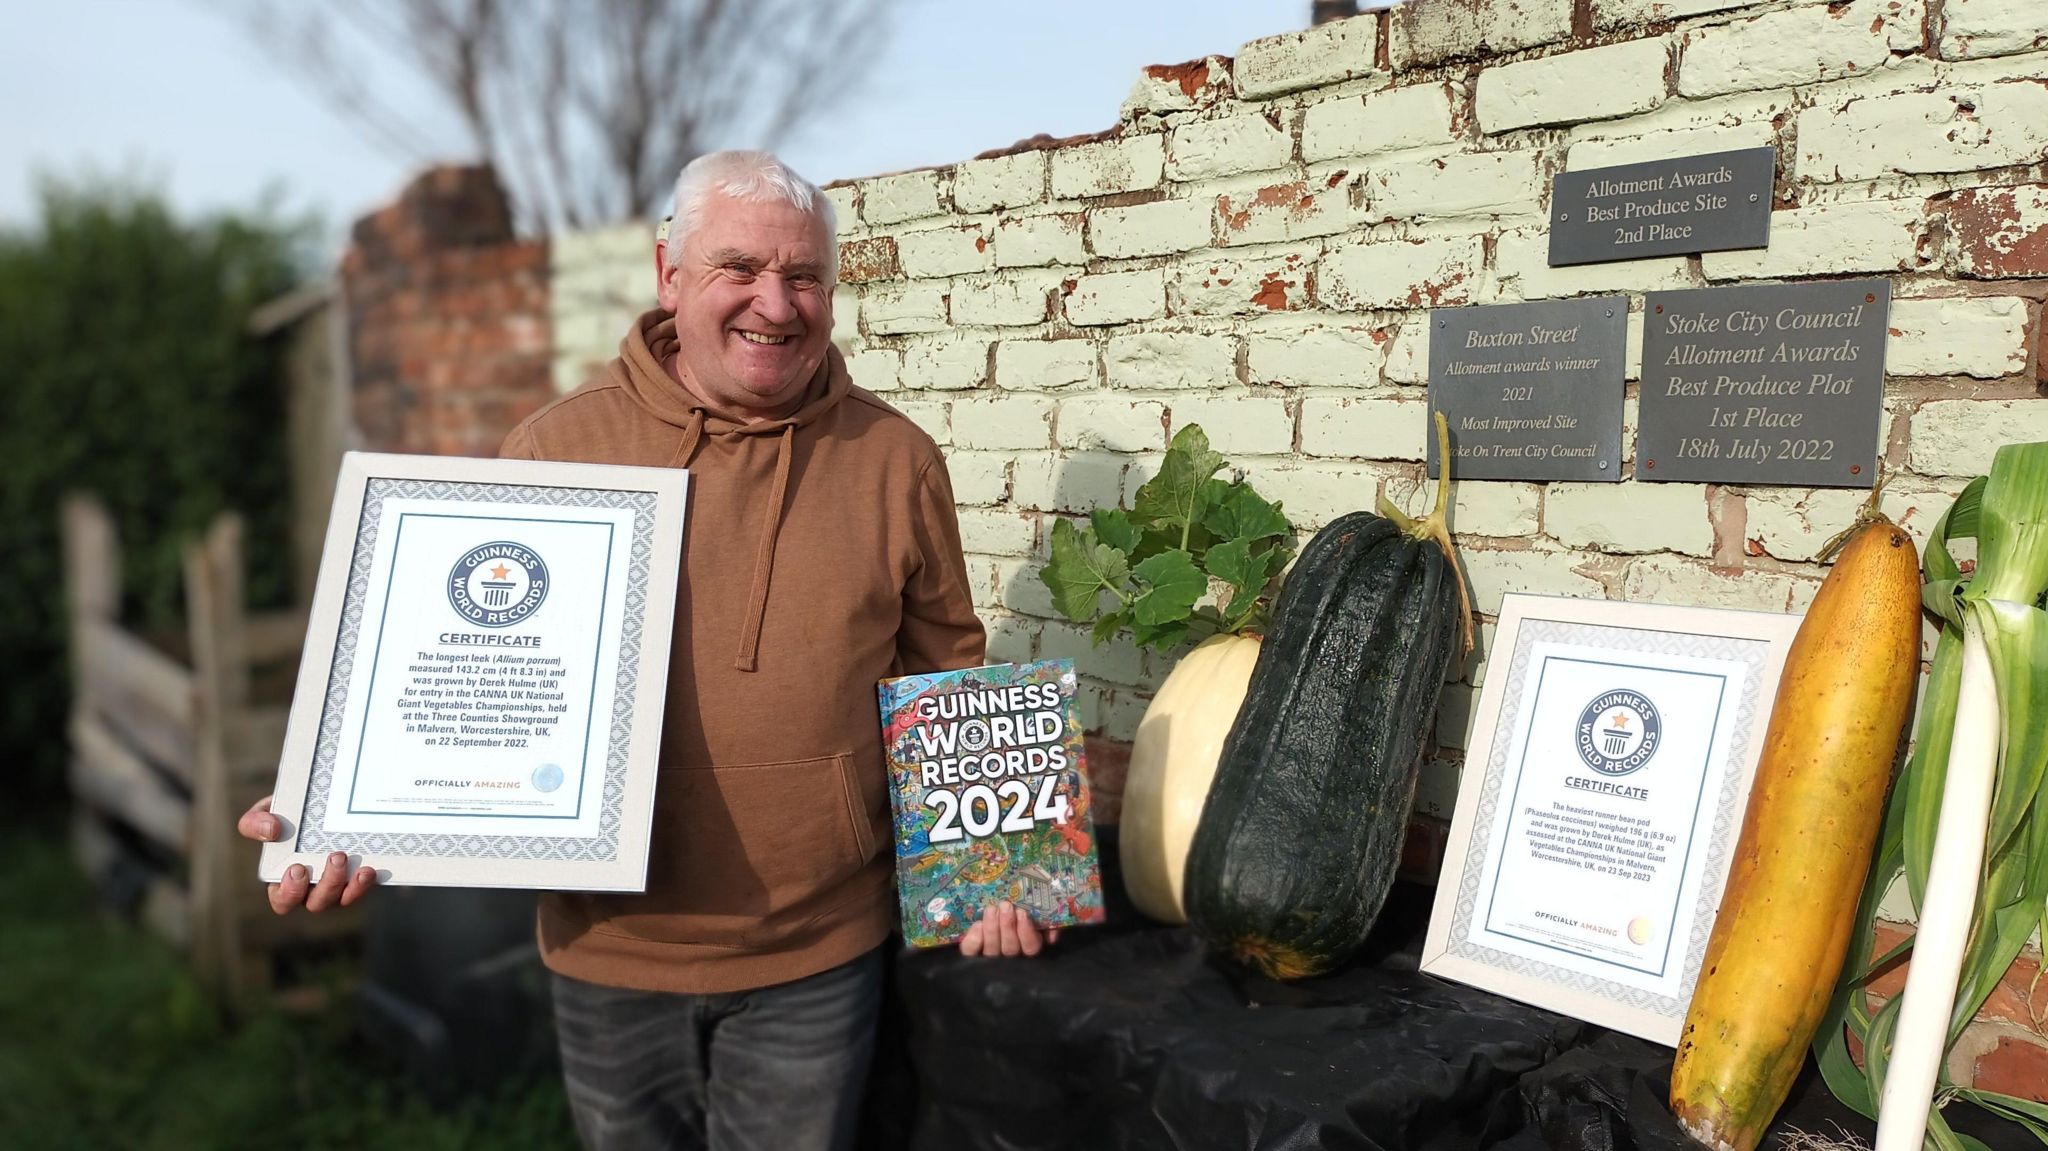 Derek Holme is surrounded by large vegtables and two Guinness world record certificates He is also holding the Guinness Book World Records 2024.